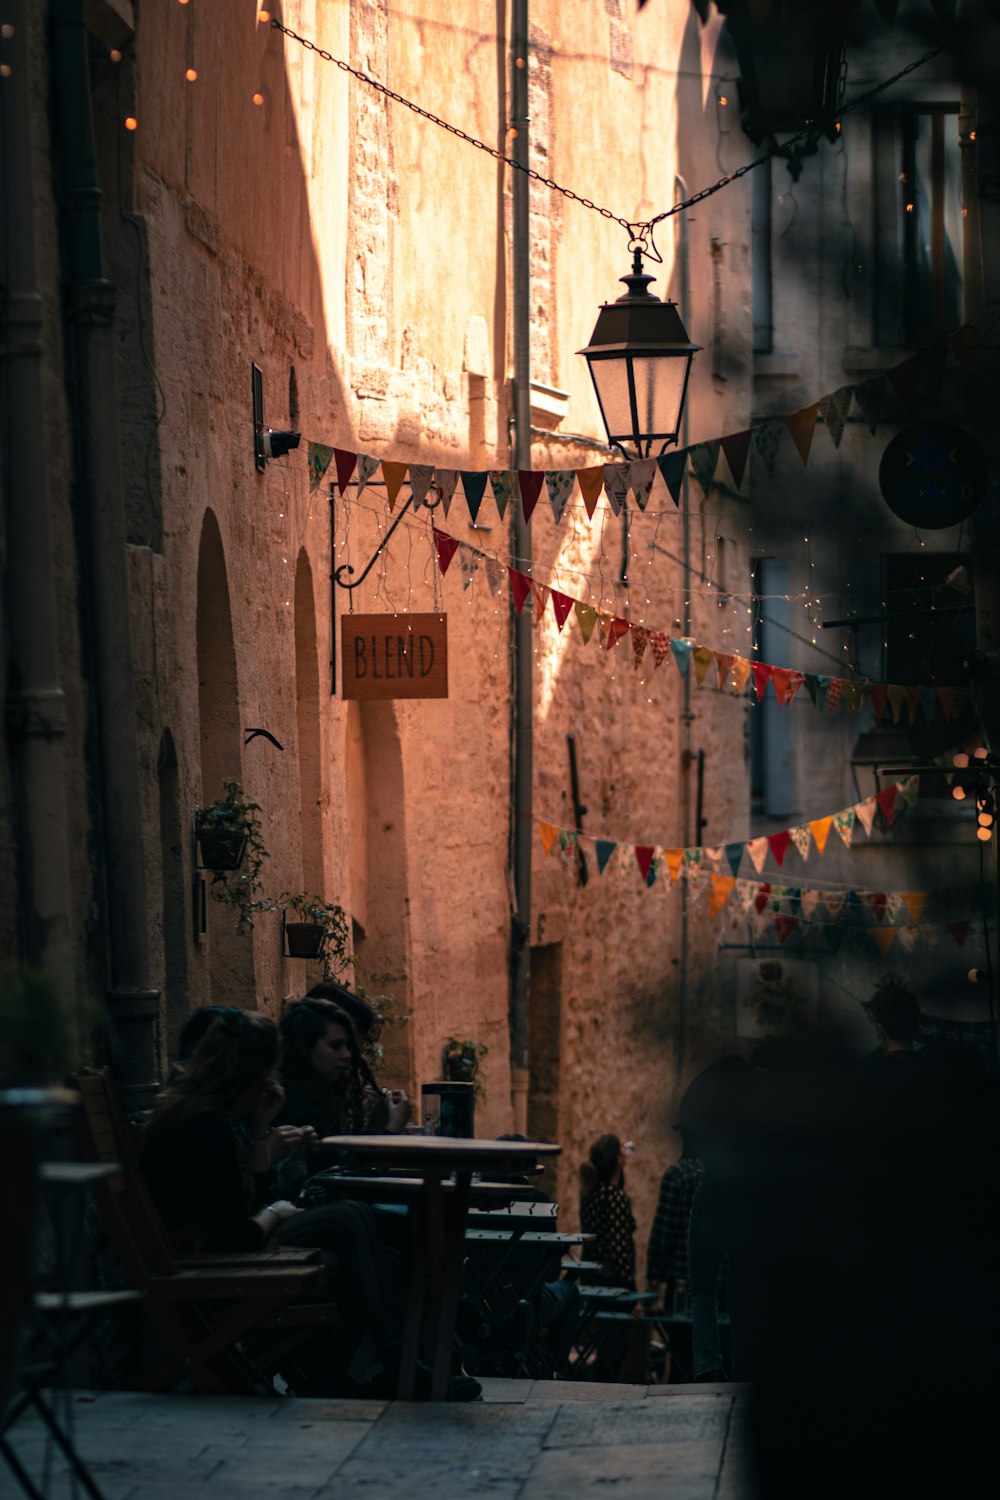 a person sitting at a table in an alleyway